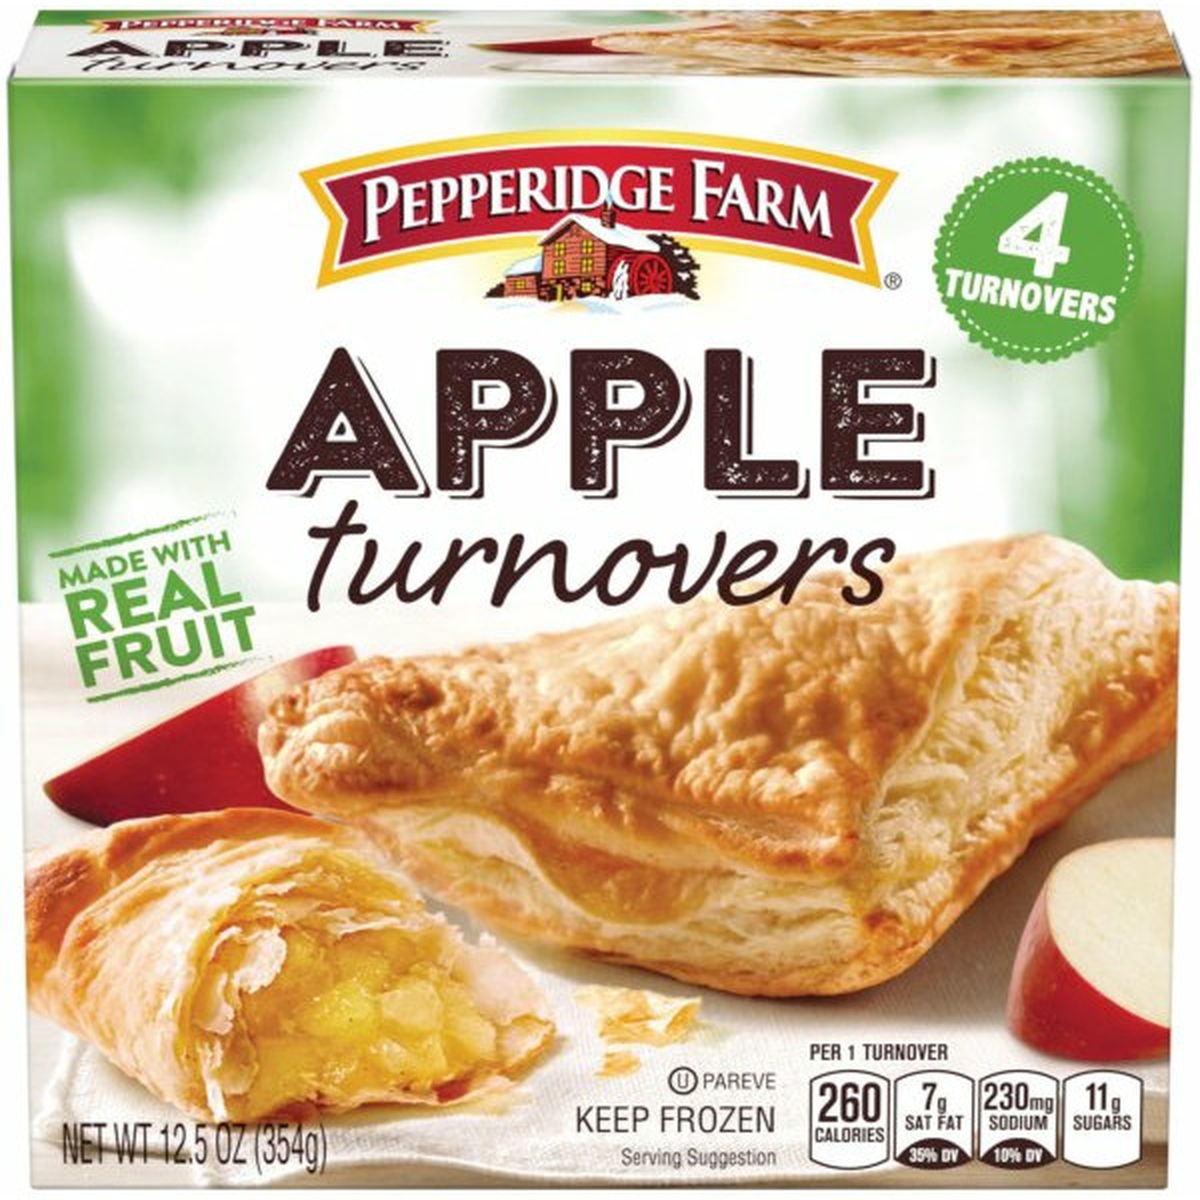 Calories in Pepperidge Farms  Frozen Apple Turnovers Pastries